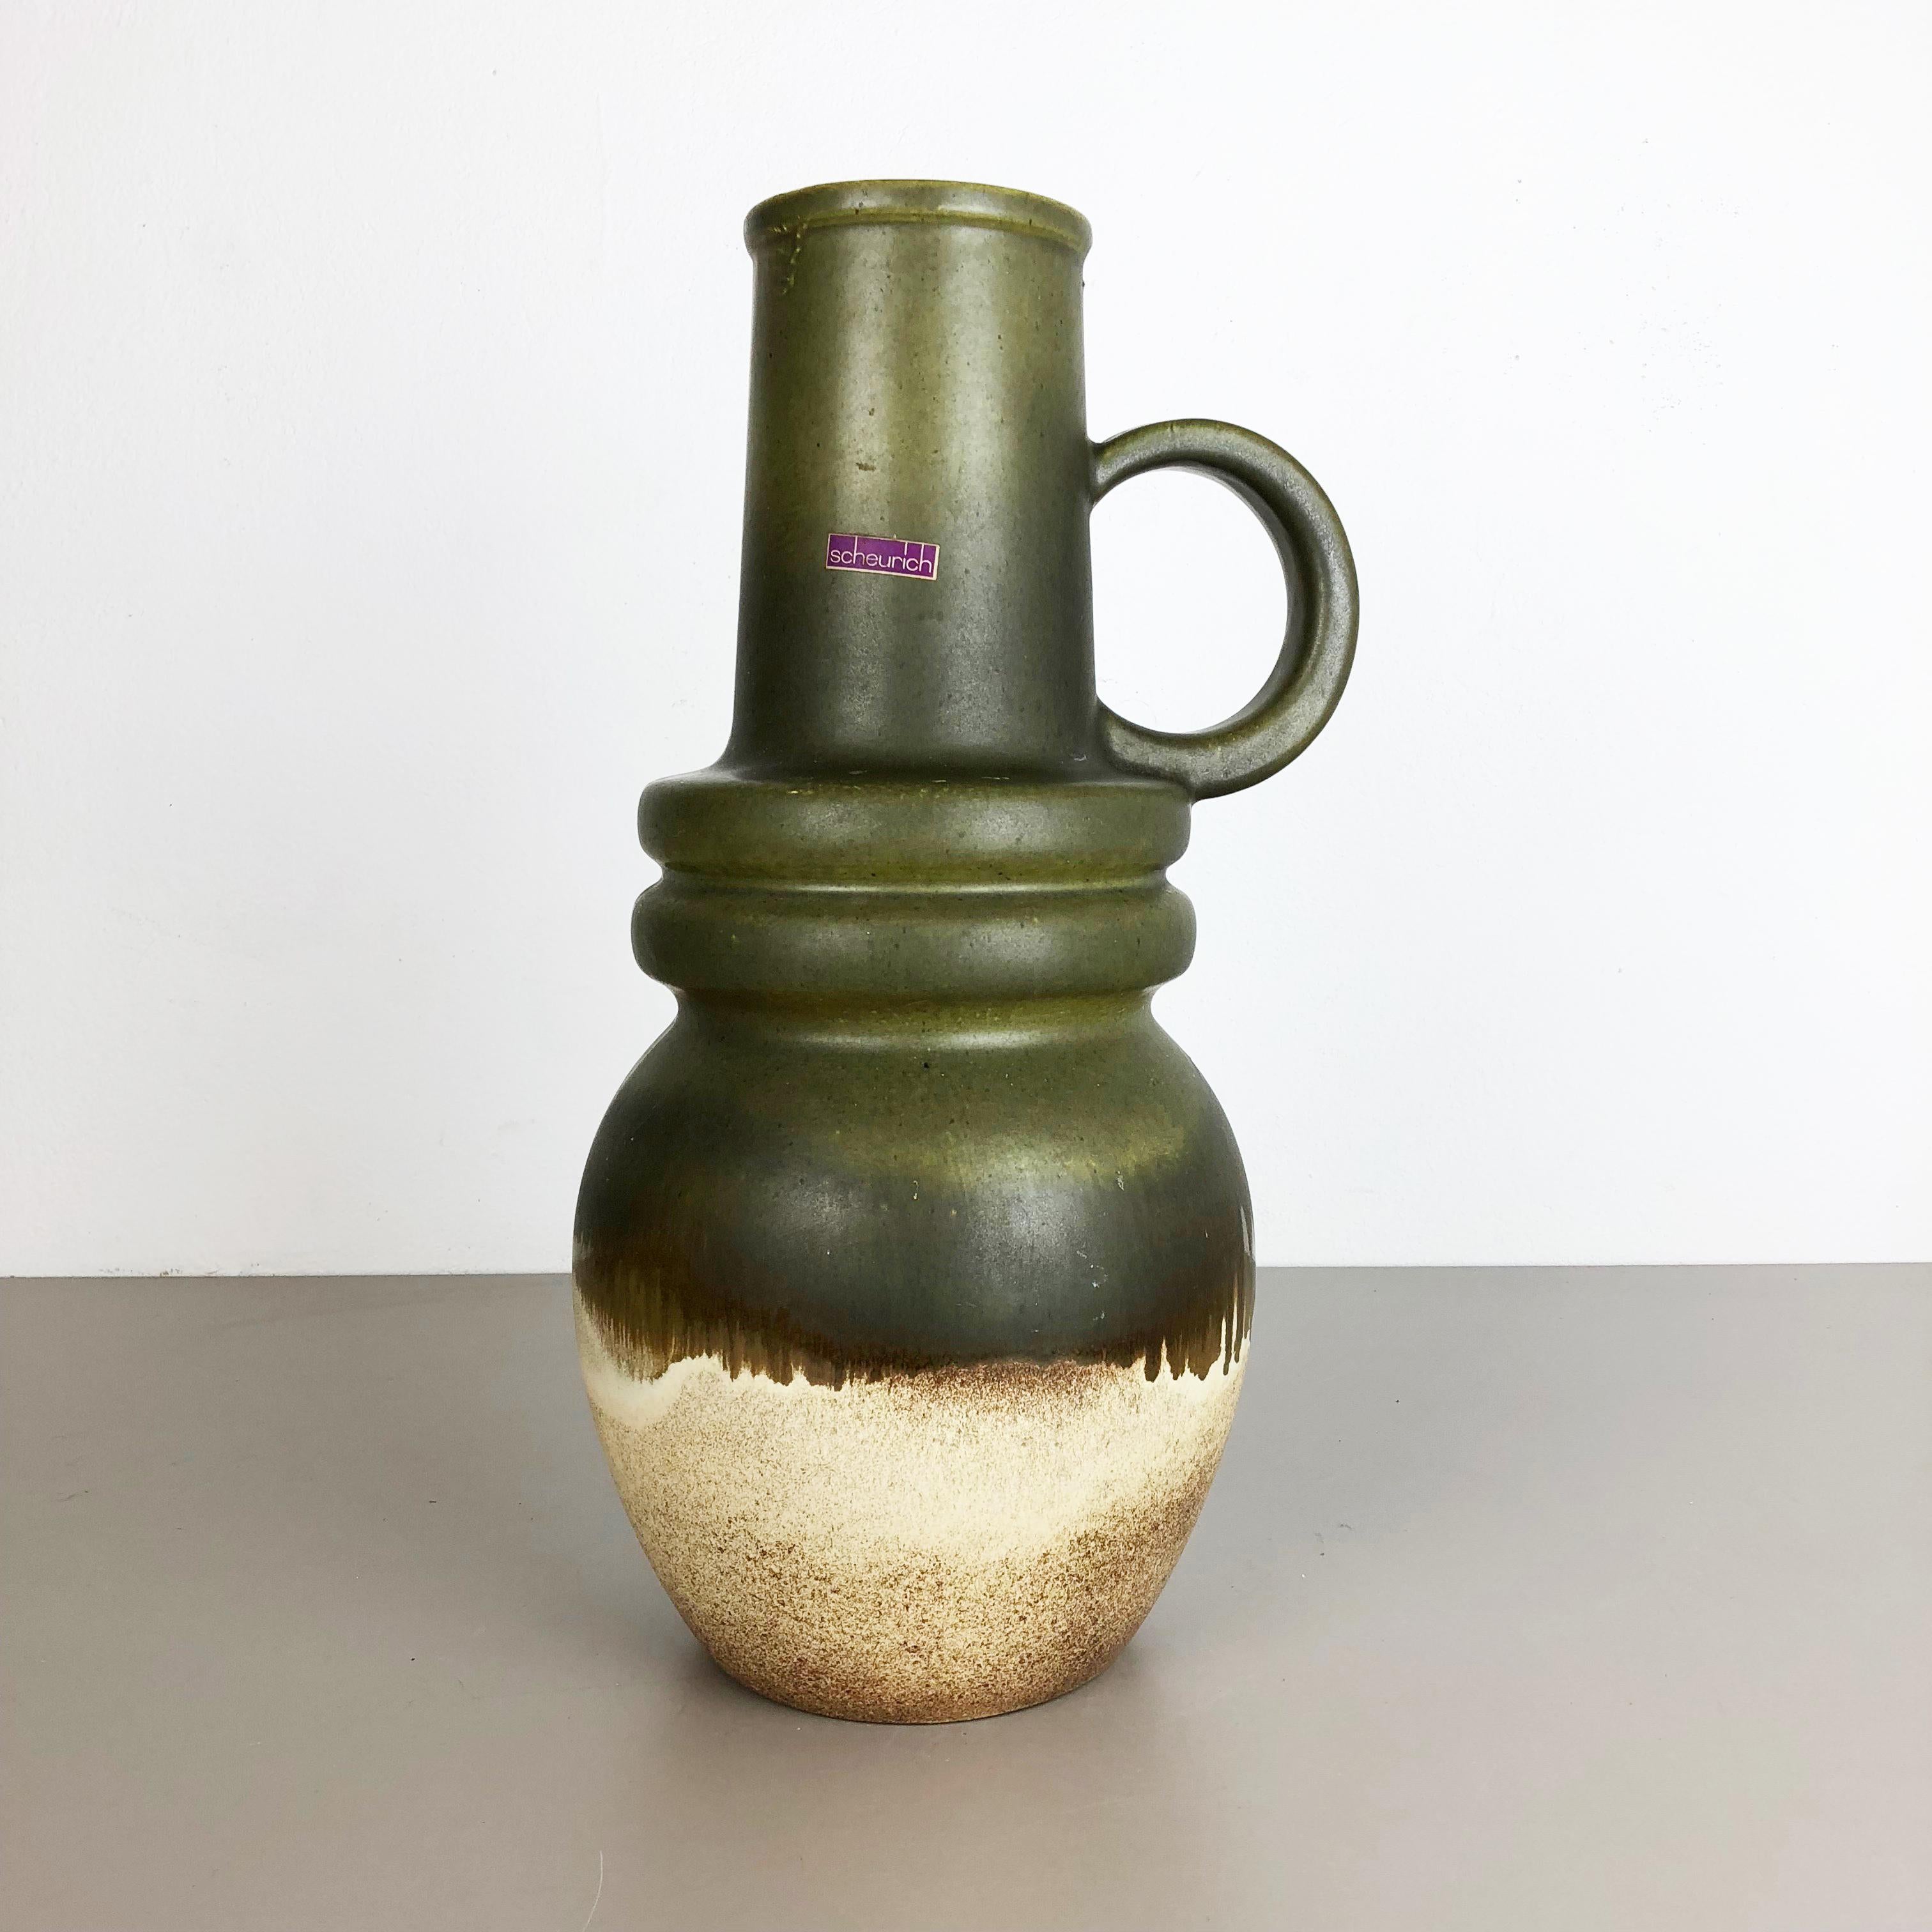 Article:

Extra large fat lava art vase. 

Measures: 48 cm



Model: 

428 48 Vienna



Producer:

Scheurich, Germany



Decade:

1970s


 

This original vintage vase was produced in the 1970s in Germany. It is made of